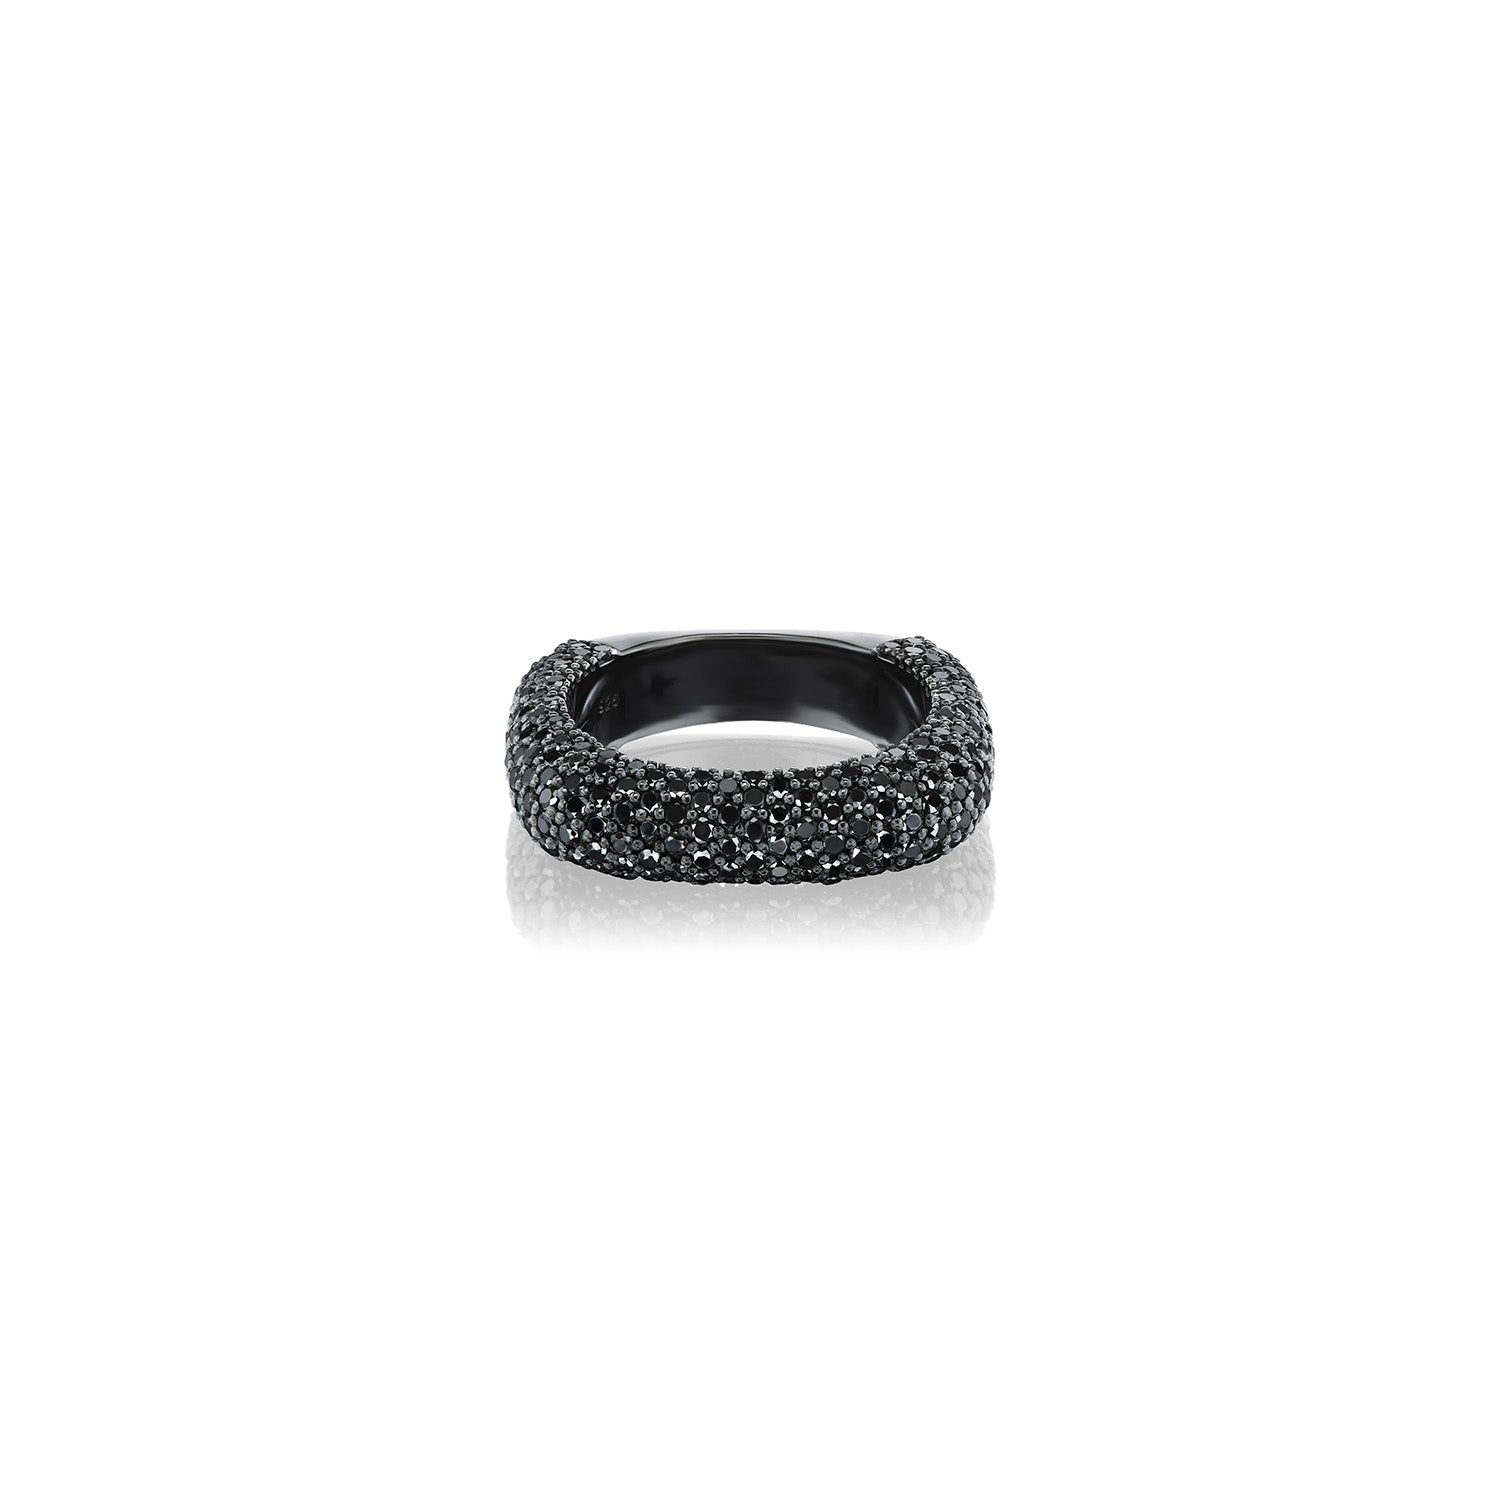 Womens Silver Diamond Ring in the Shape of a Square with a Fringe on  Finger, on a Black Background. Stock Photo - Image of color, black:  145163994